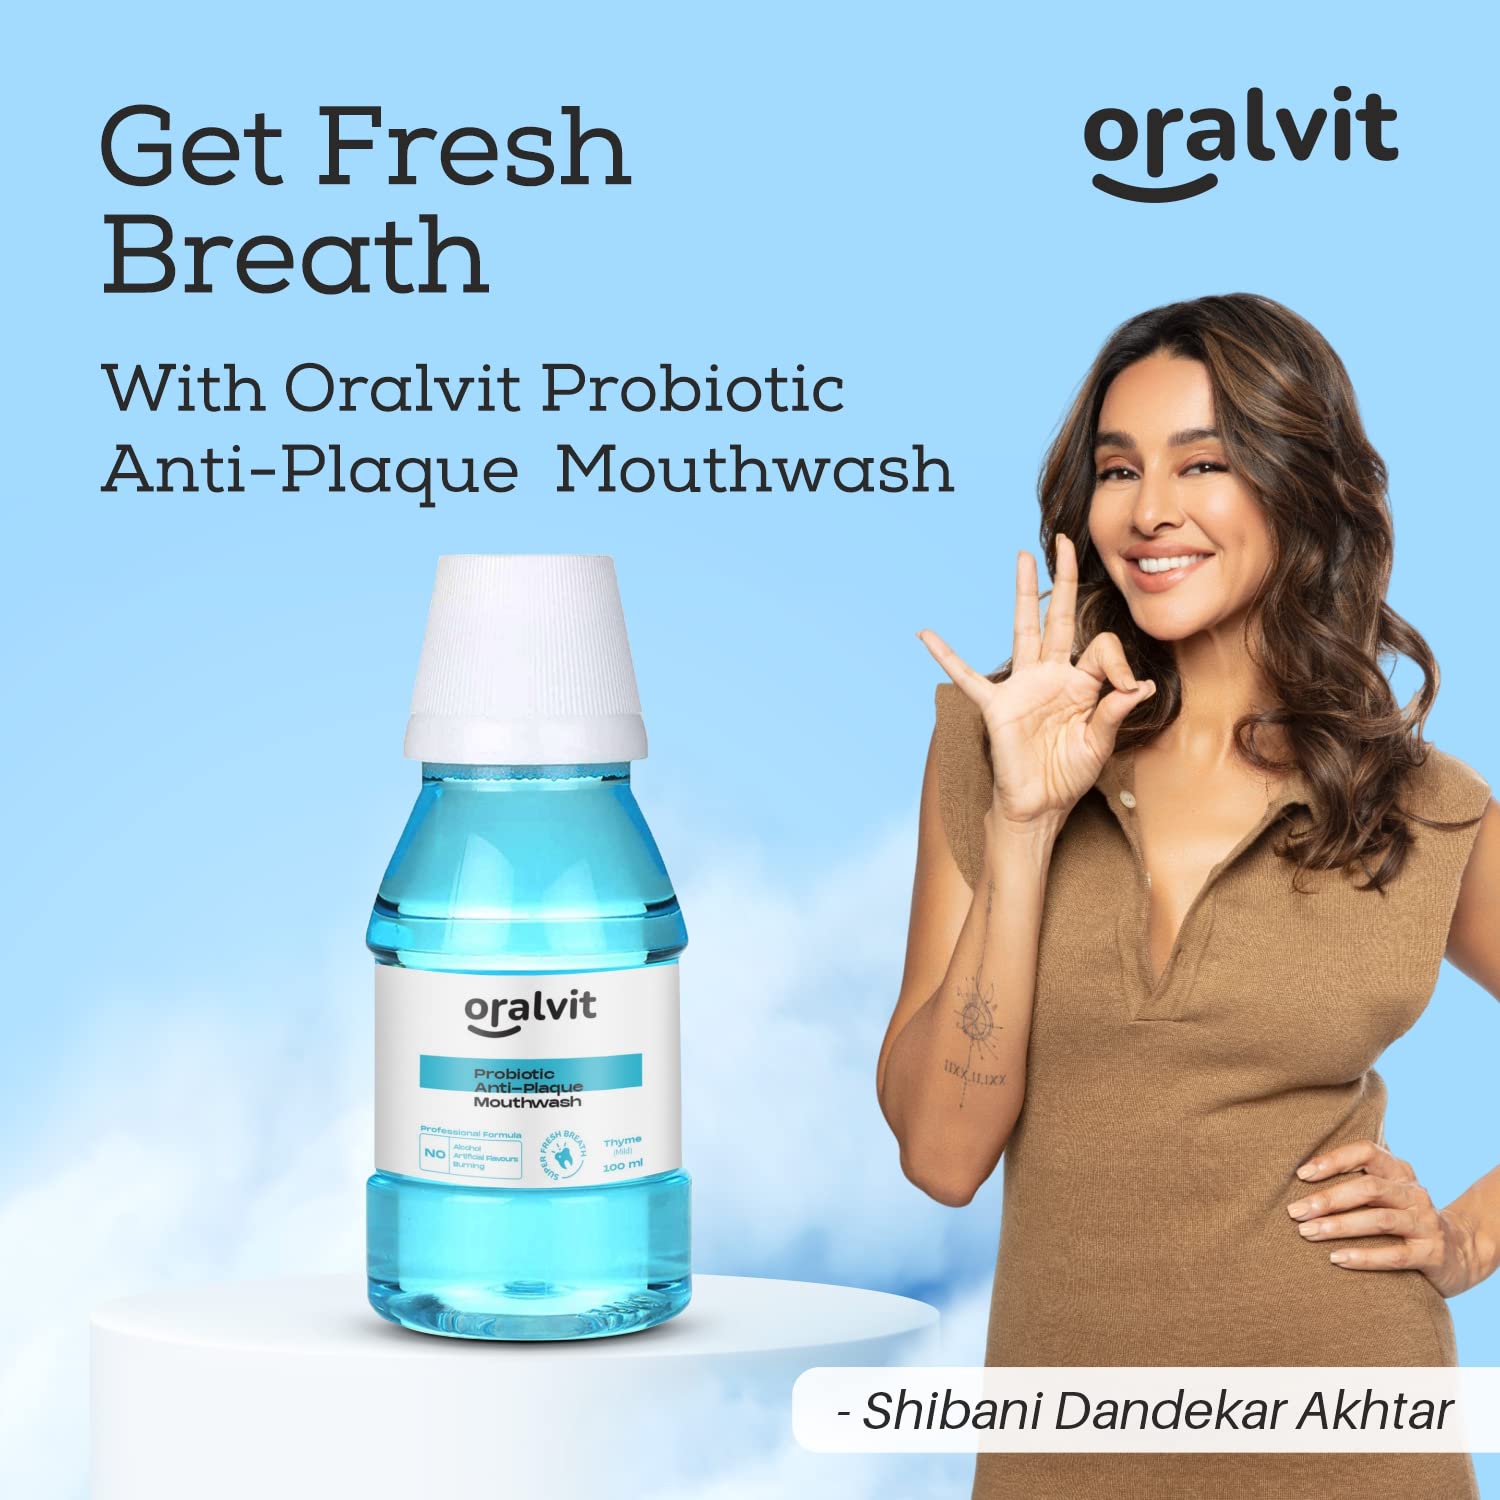 Oralvit Probiotic Anti-Plaque Mouthwash with Mild Thyme | Fights Germs | No Alcohol, No Burning Sensation, No Artificial Flavours |For Men & Women – 100ml (Pack of 3)